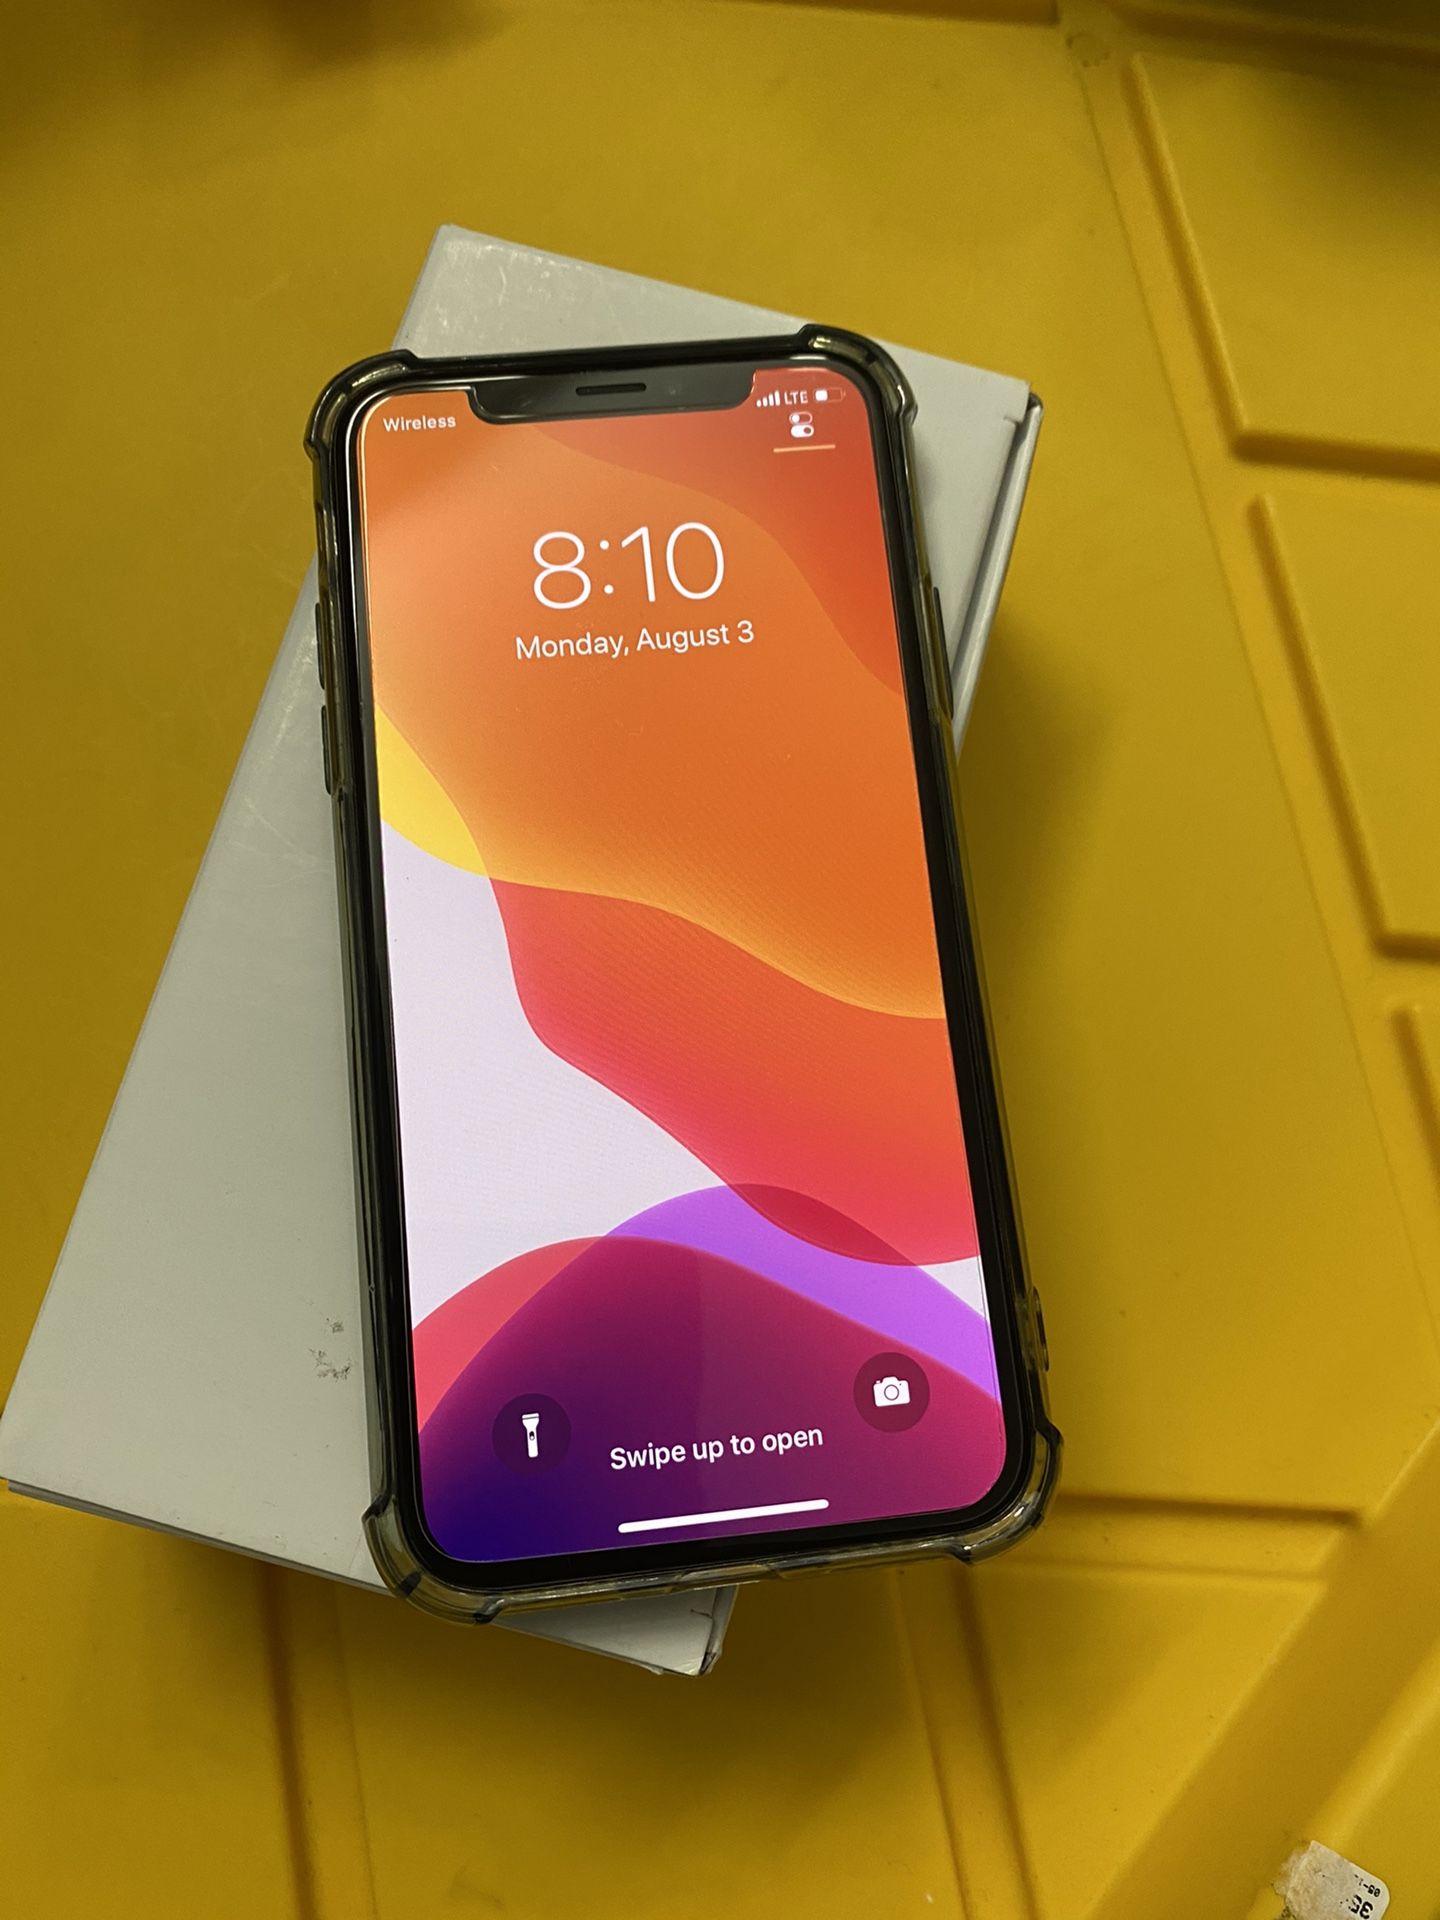 iPhone X 64 GB space gray factory unlocked any carrier